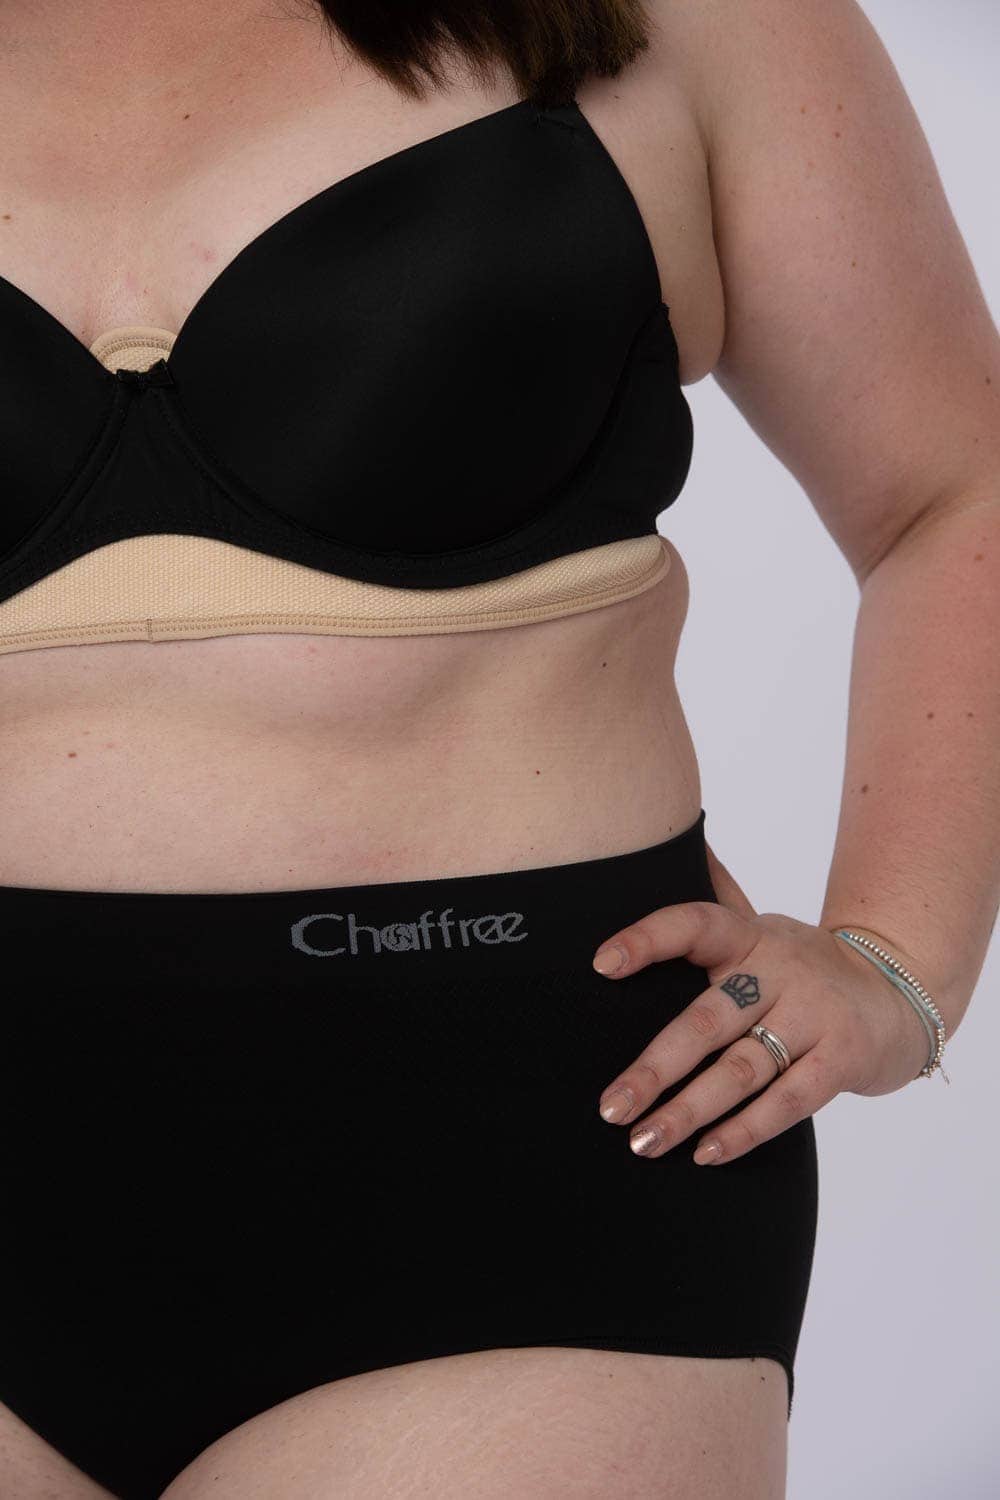 More of Me to Love's Bamboo Bra Liners Help With Sweat and Chafing